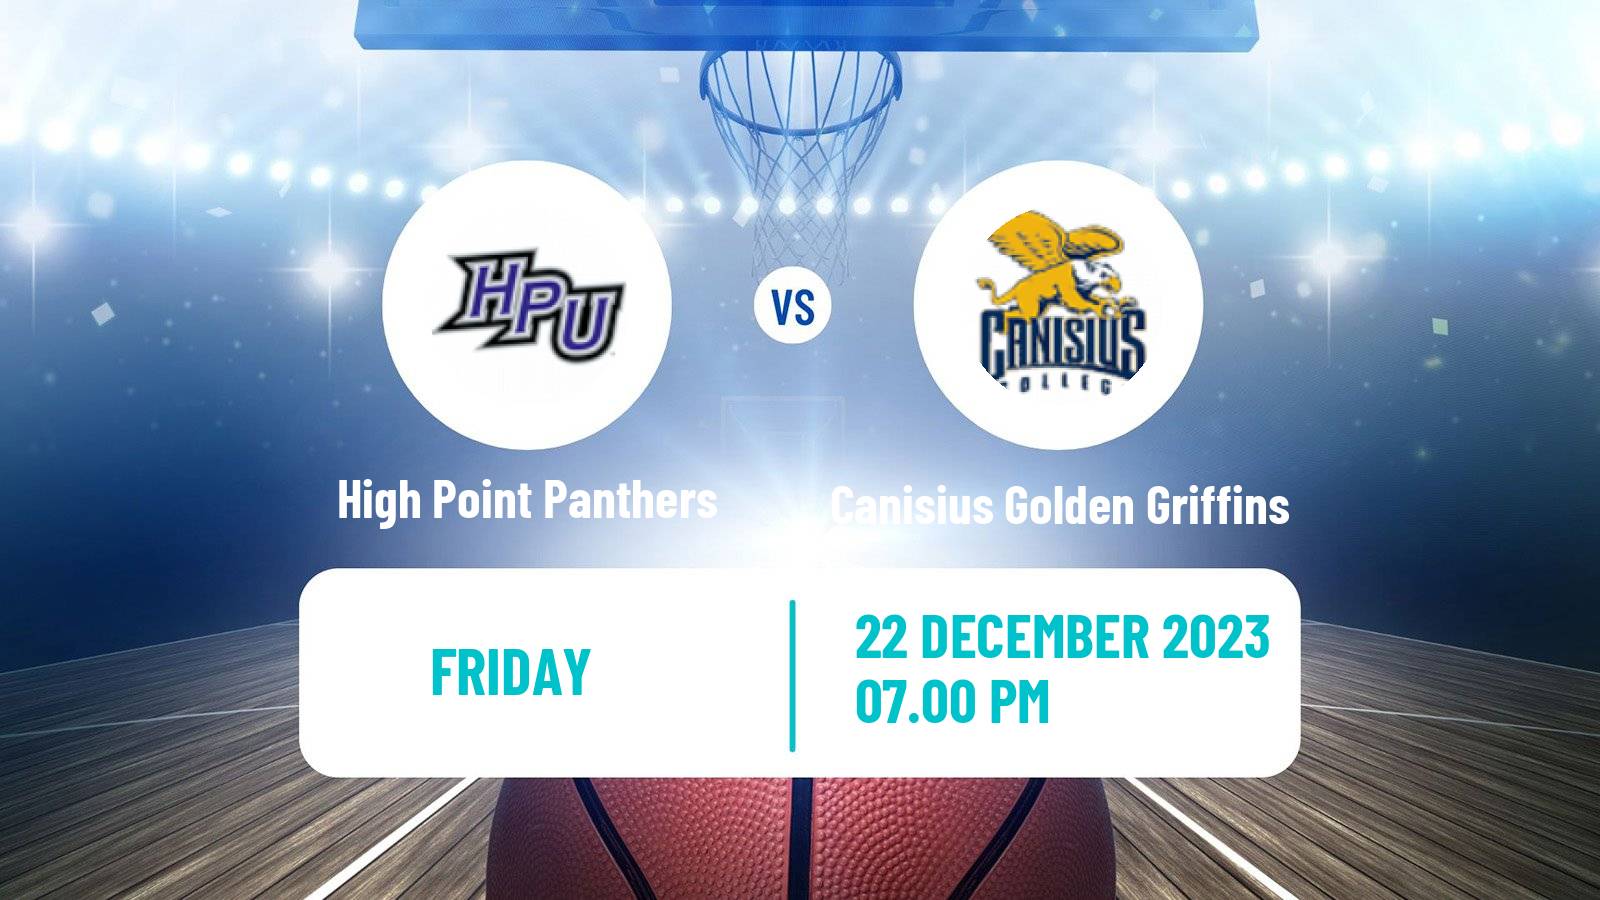 Basketball NCAA College Basketball High Point Panthers - Canisius Golden Griffins